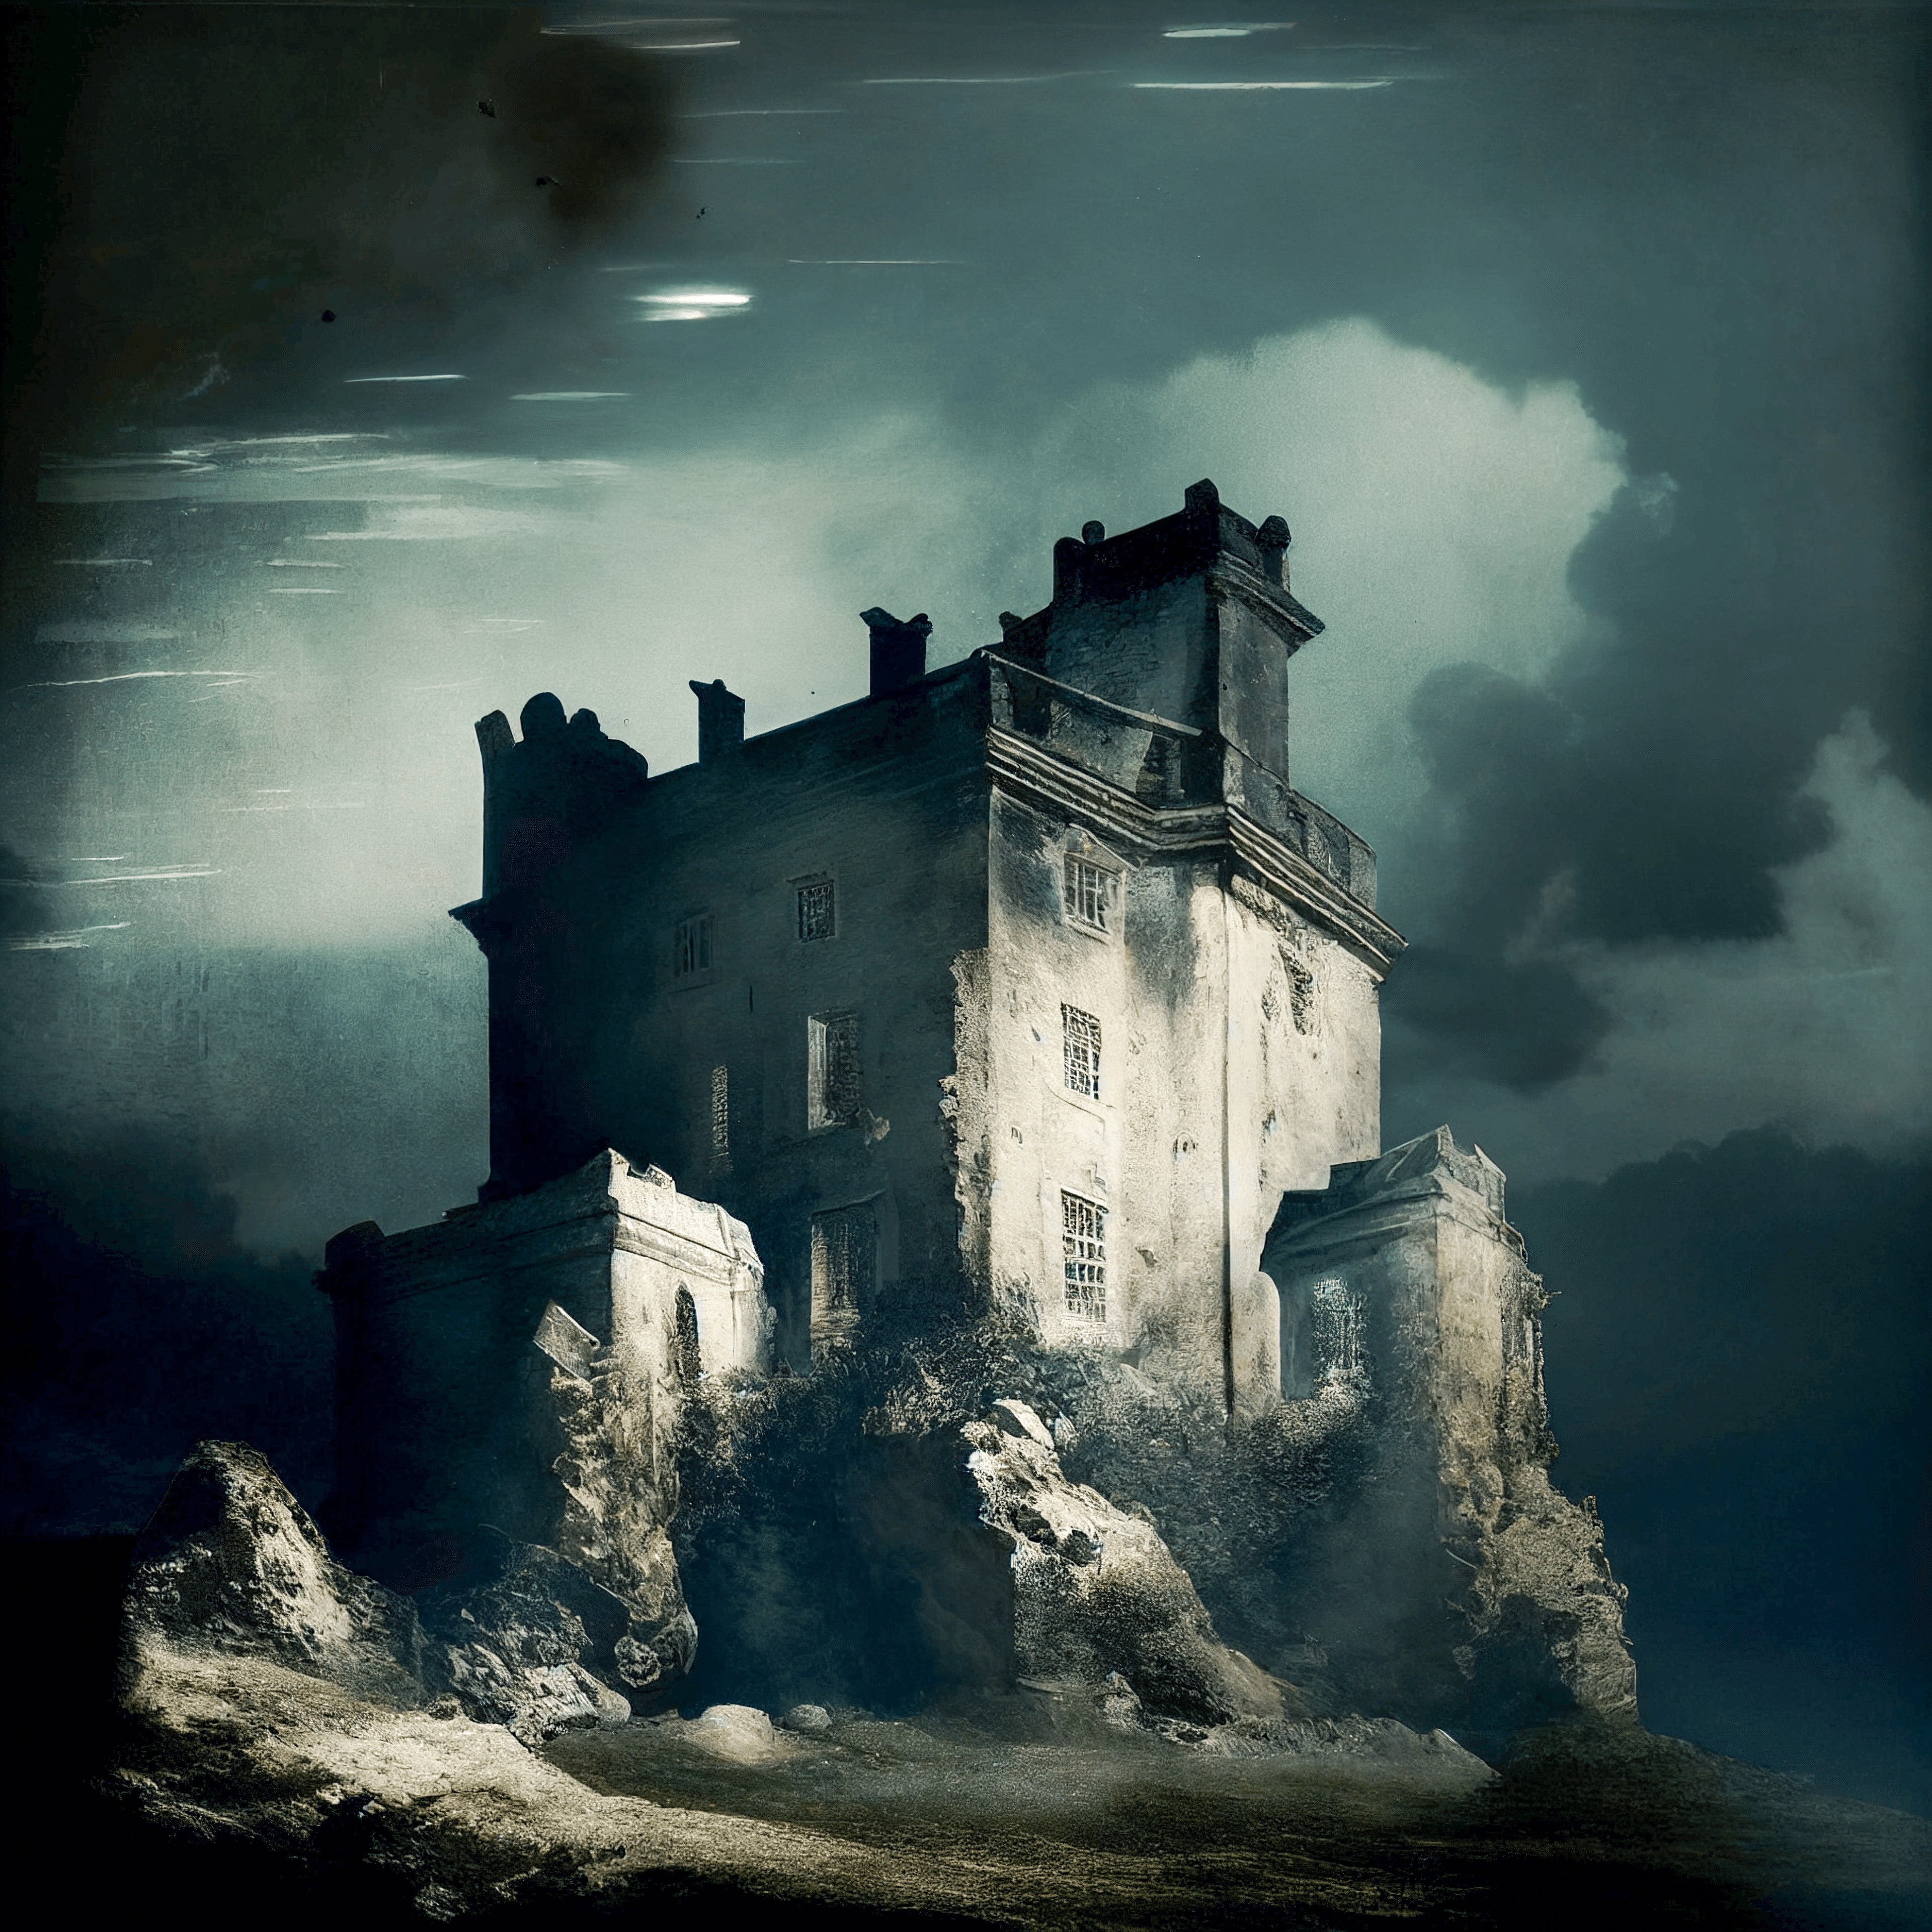 A picture of a gothic castle - available as a poster on this site